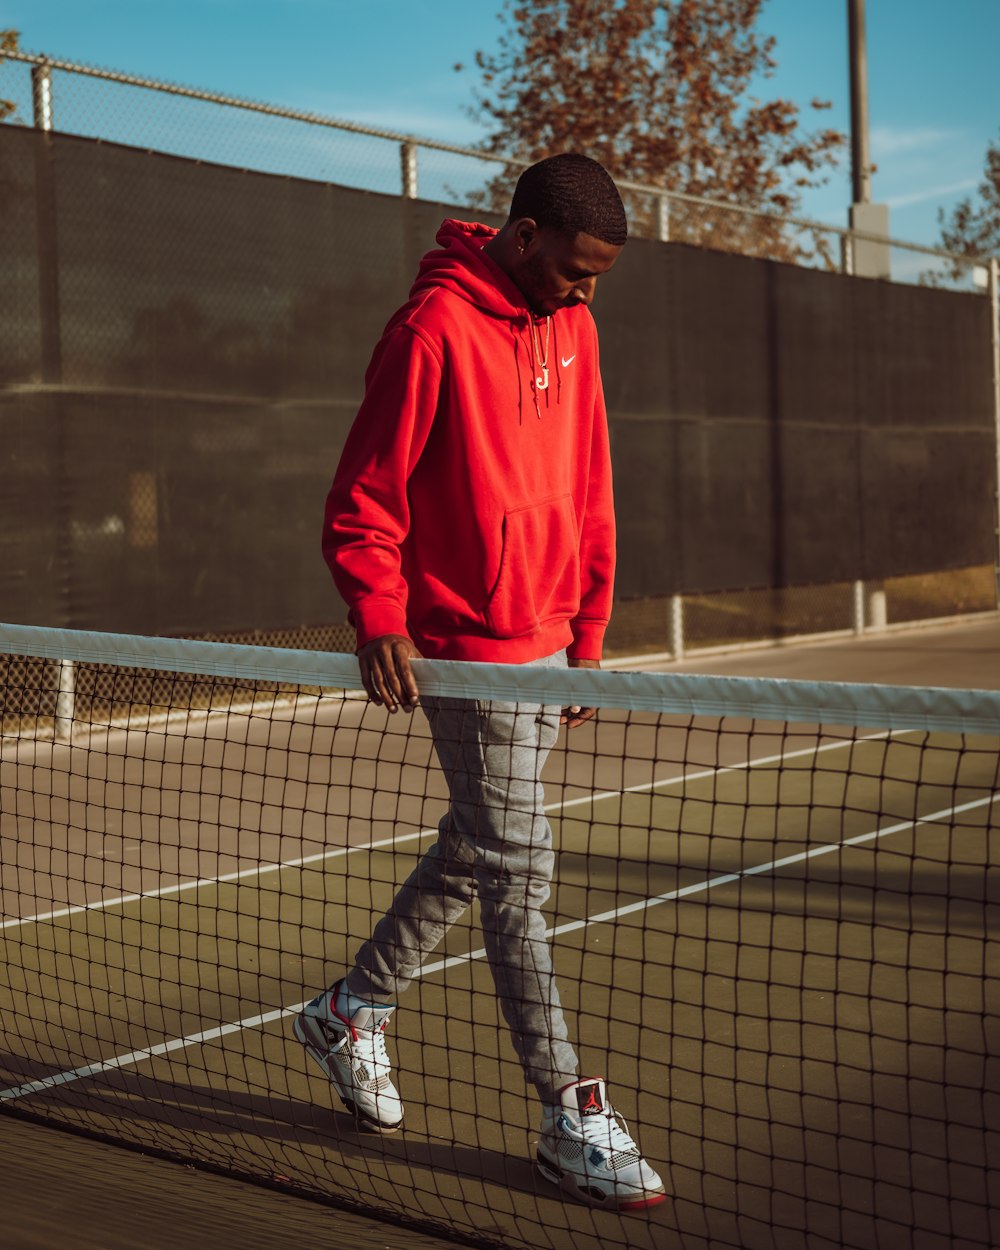 a man in a red hoodie is walking on a tennis court